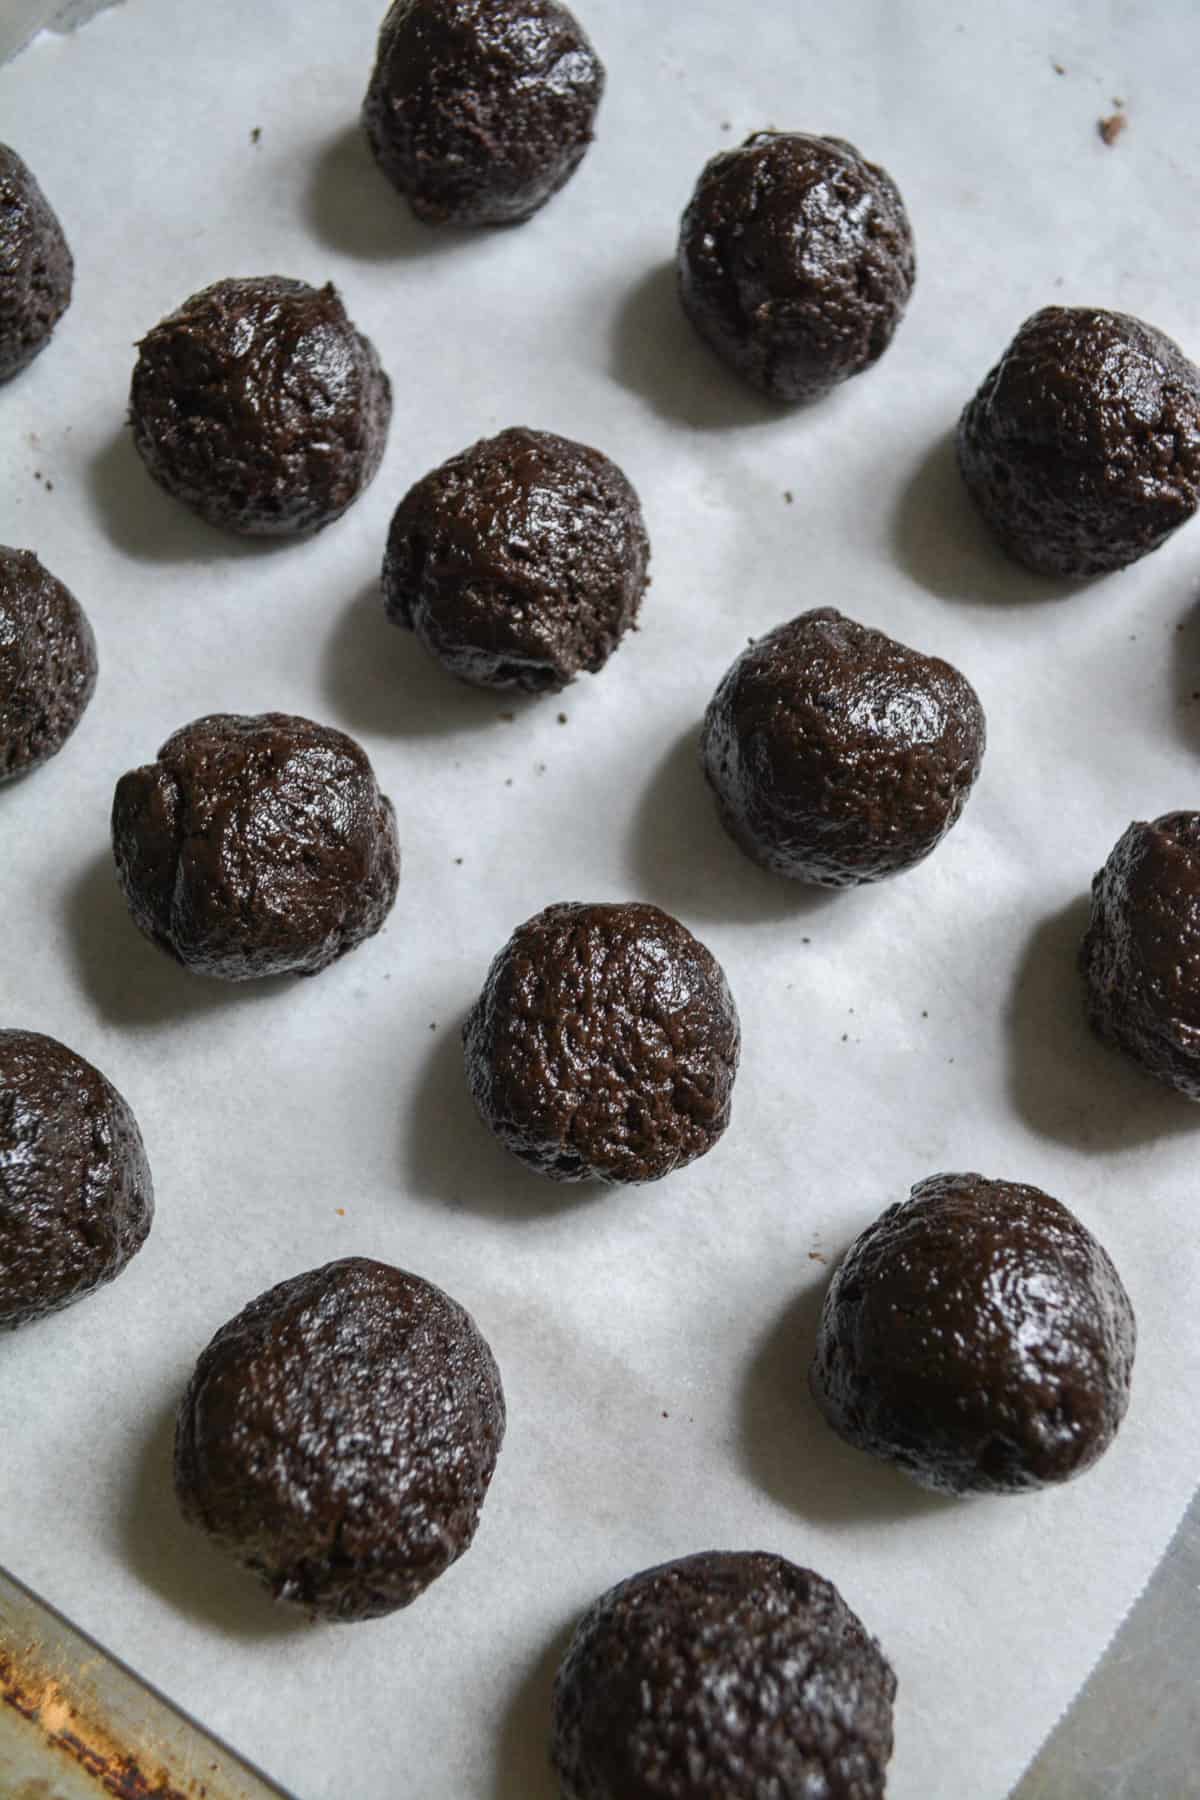 Rolled dairy-free oreo truffles on a baking sheet.